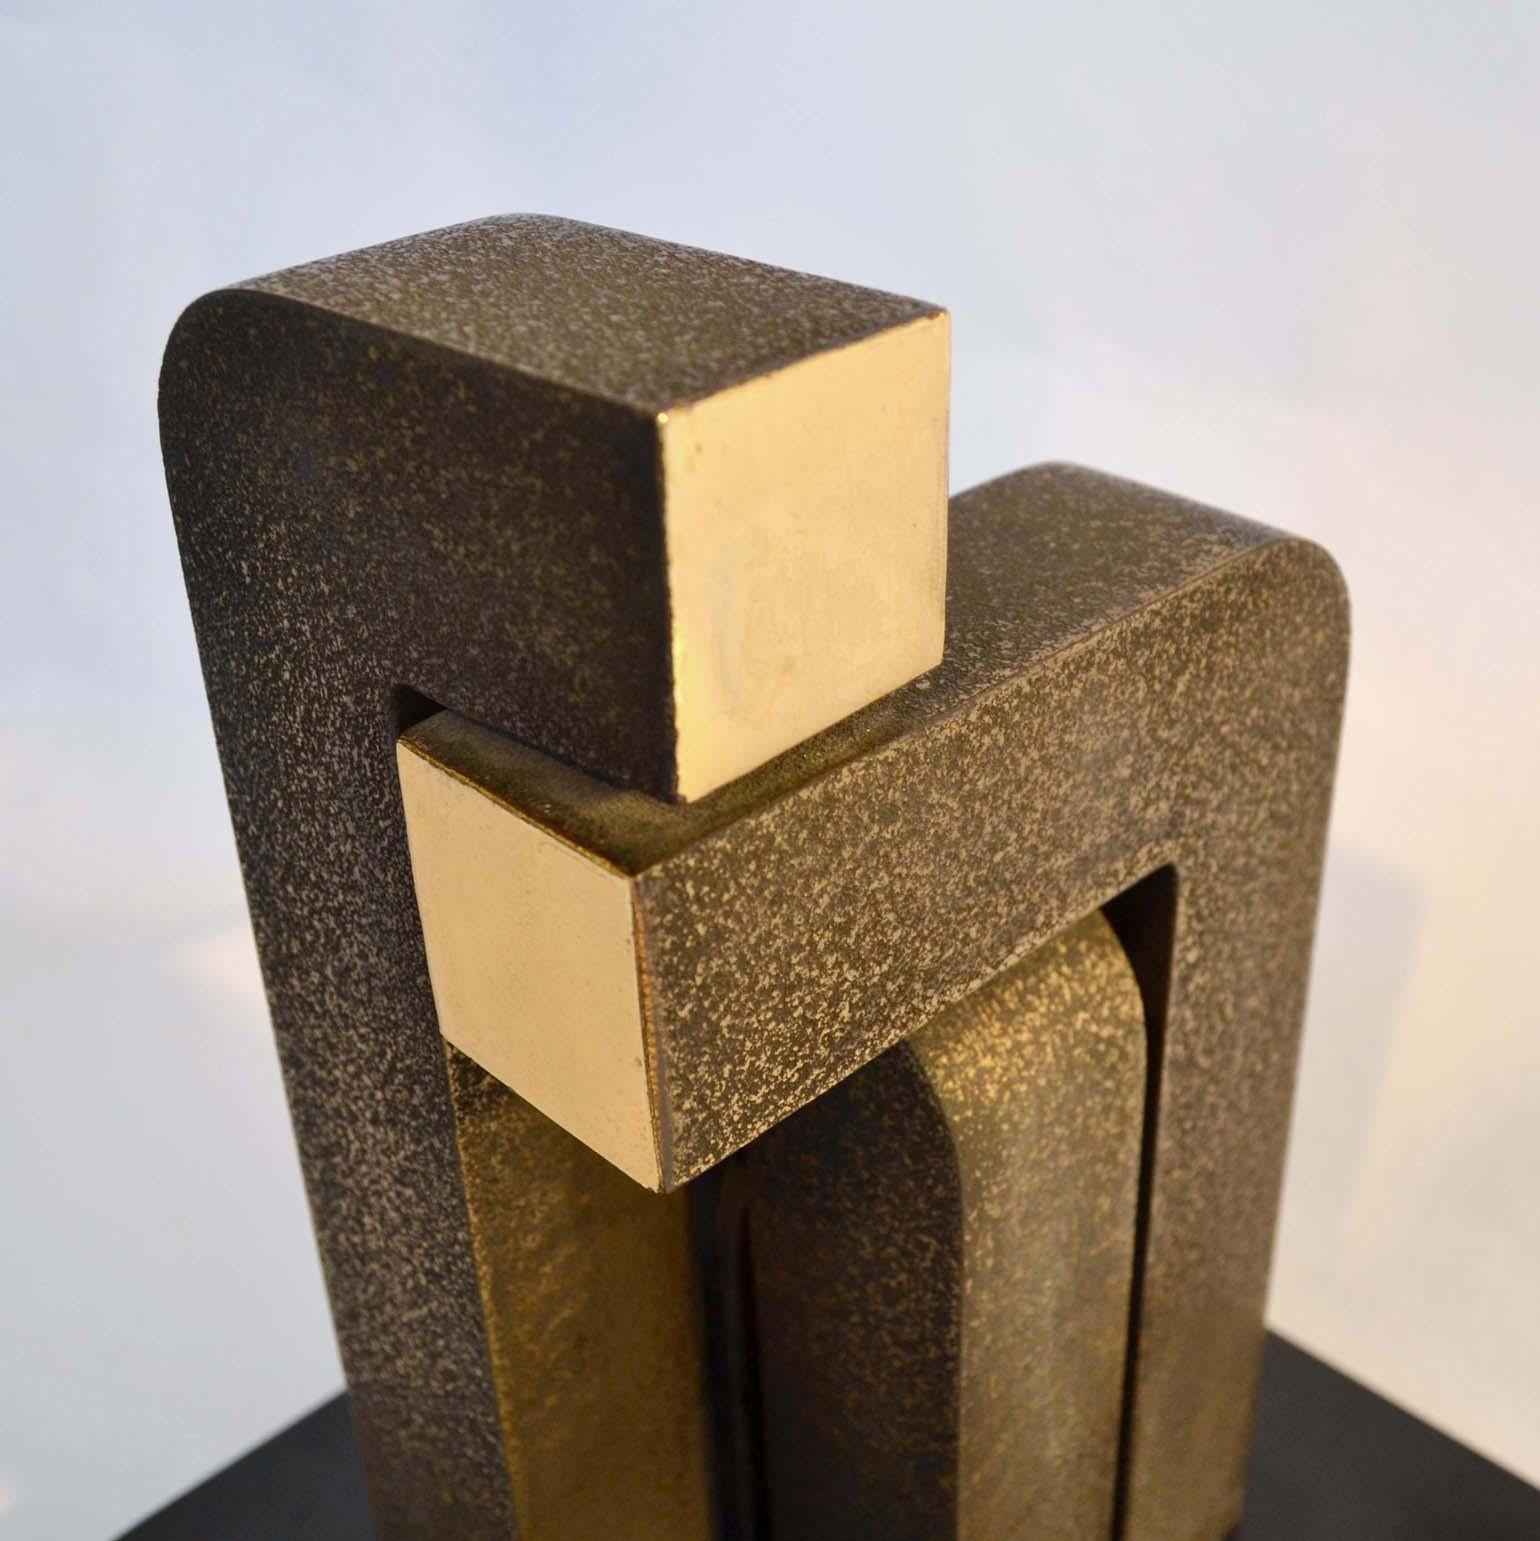 Abstract Geometric Minimalist Bronze Sculpture by Zonena 1979 in Limited Edition 1